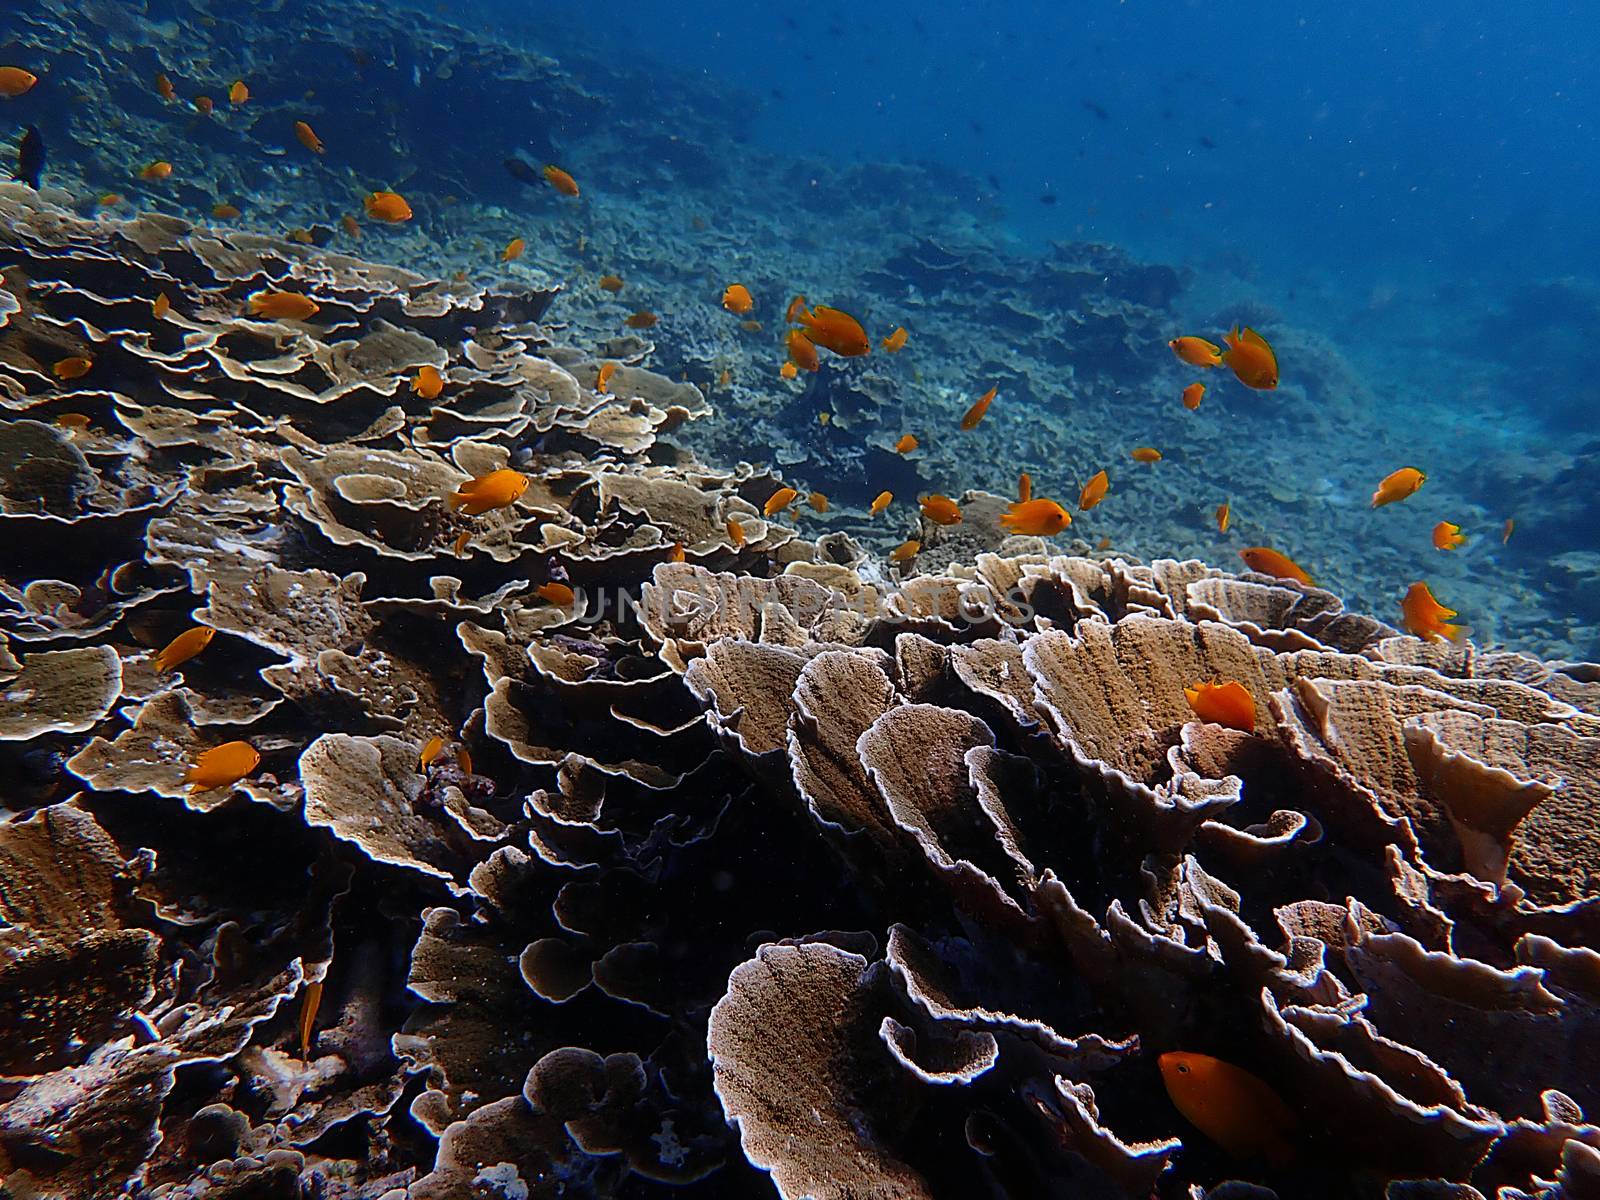 Fish and corals under blue sea, diving activity, underwater photography